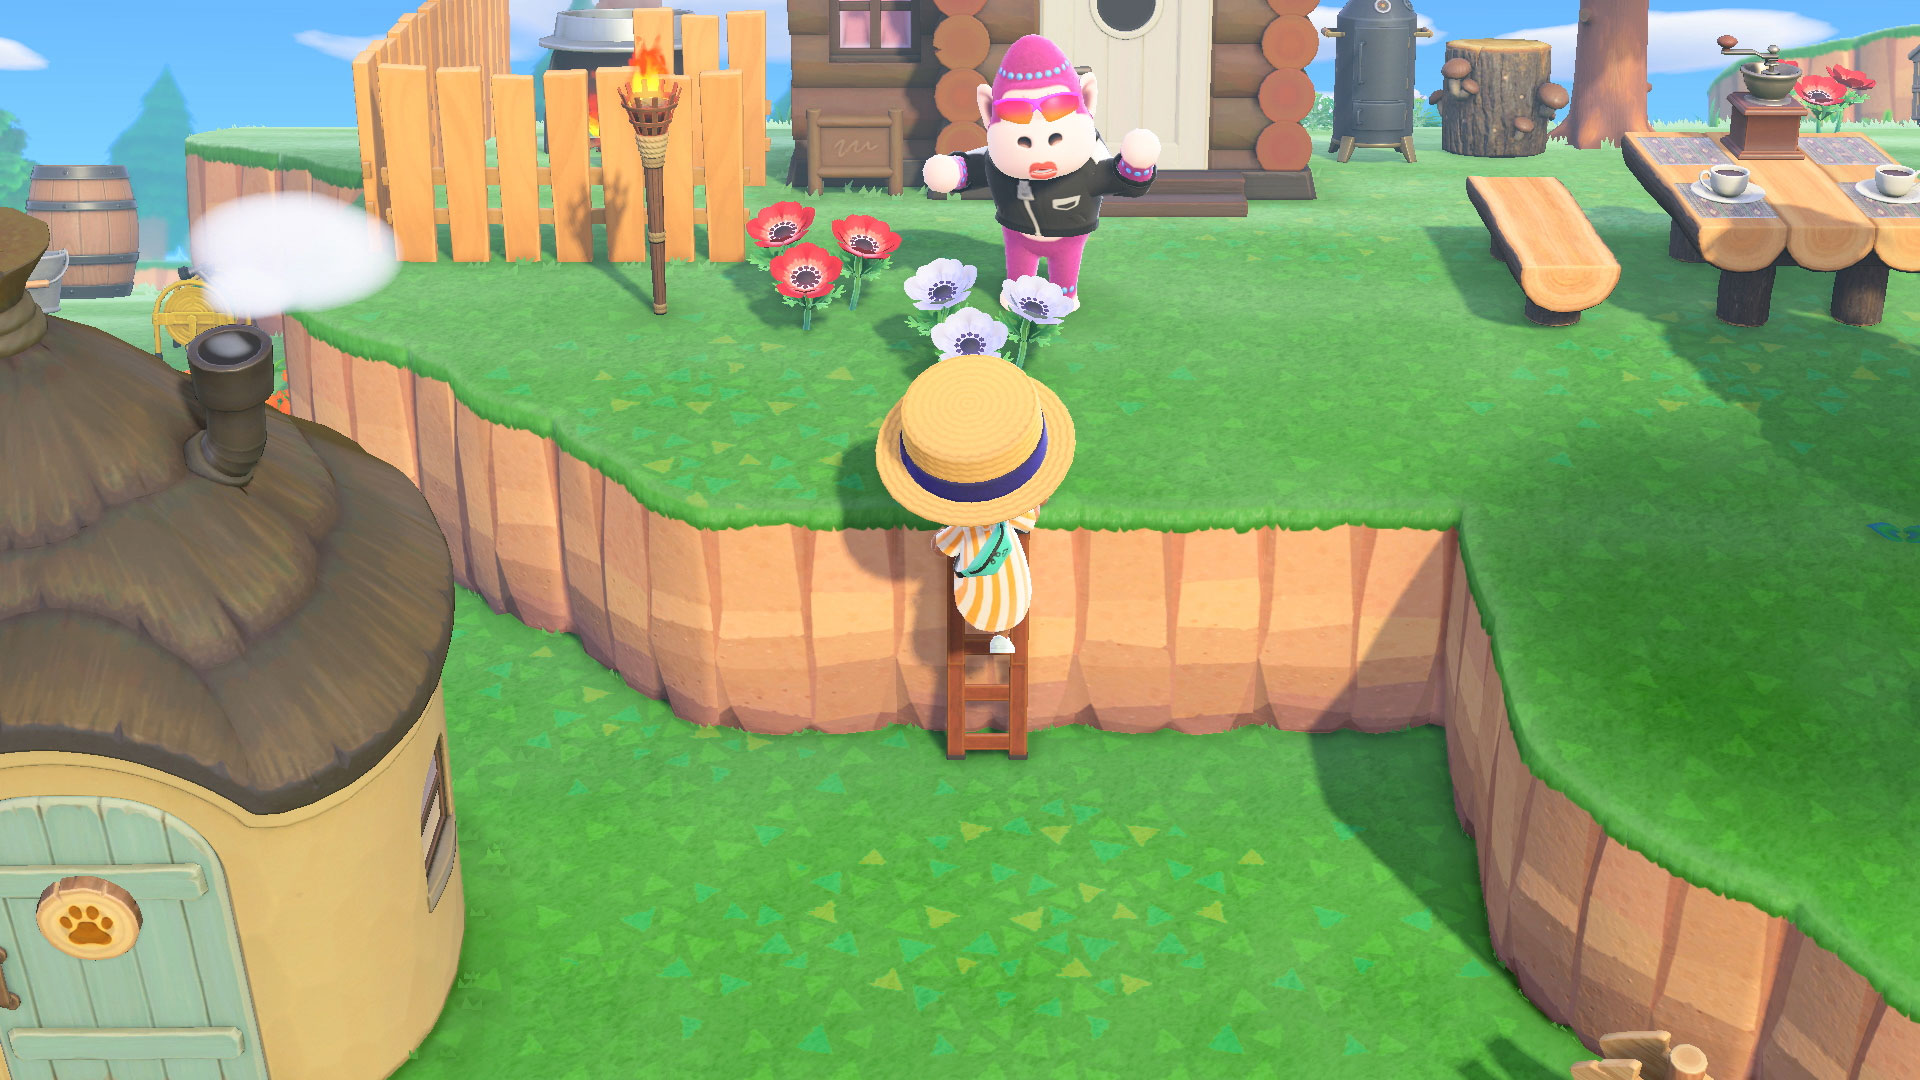 How To Get A Ladder How to get the ladder in Animal Crossing: New Horizons | GamesRadar+